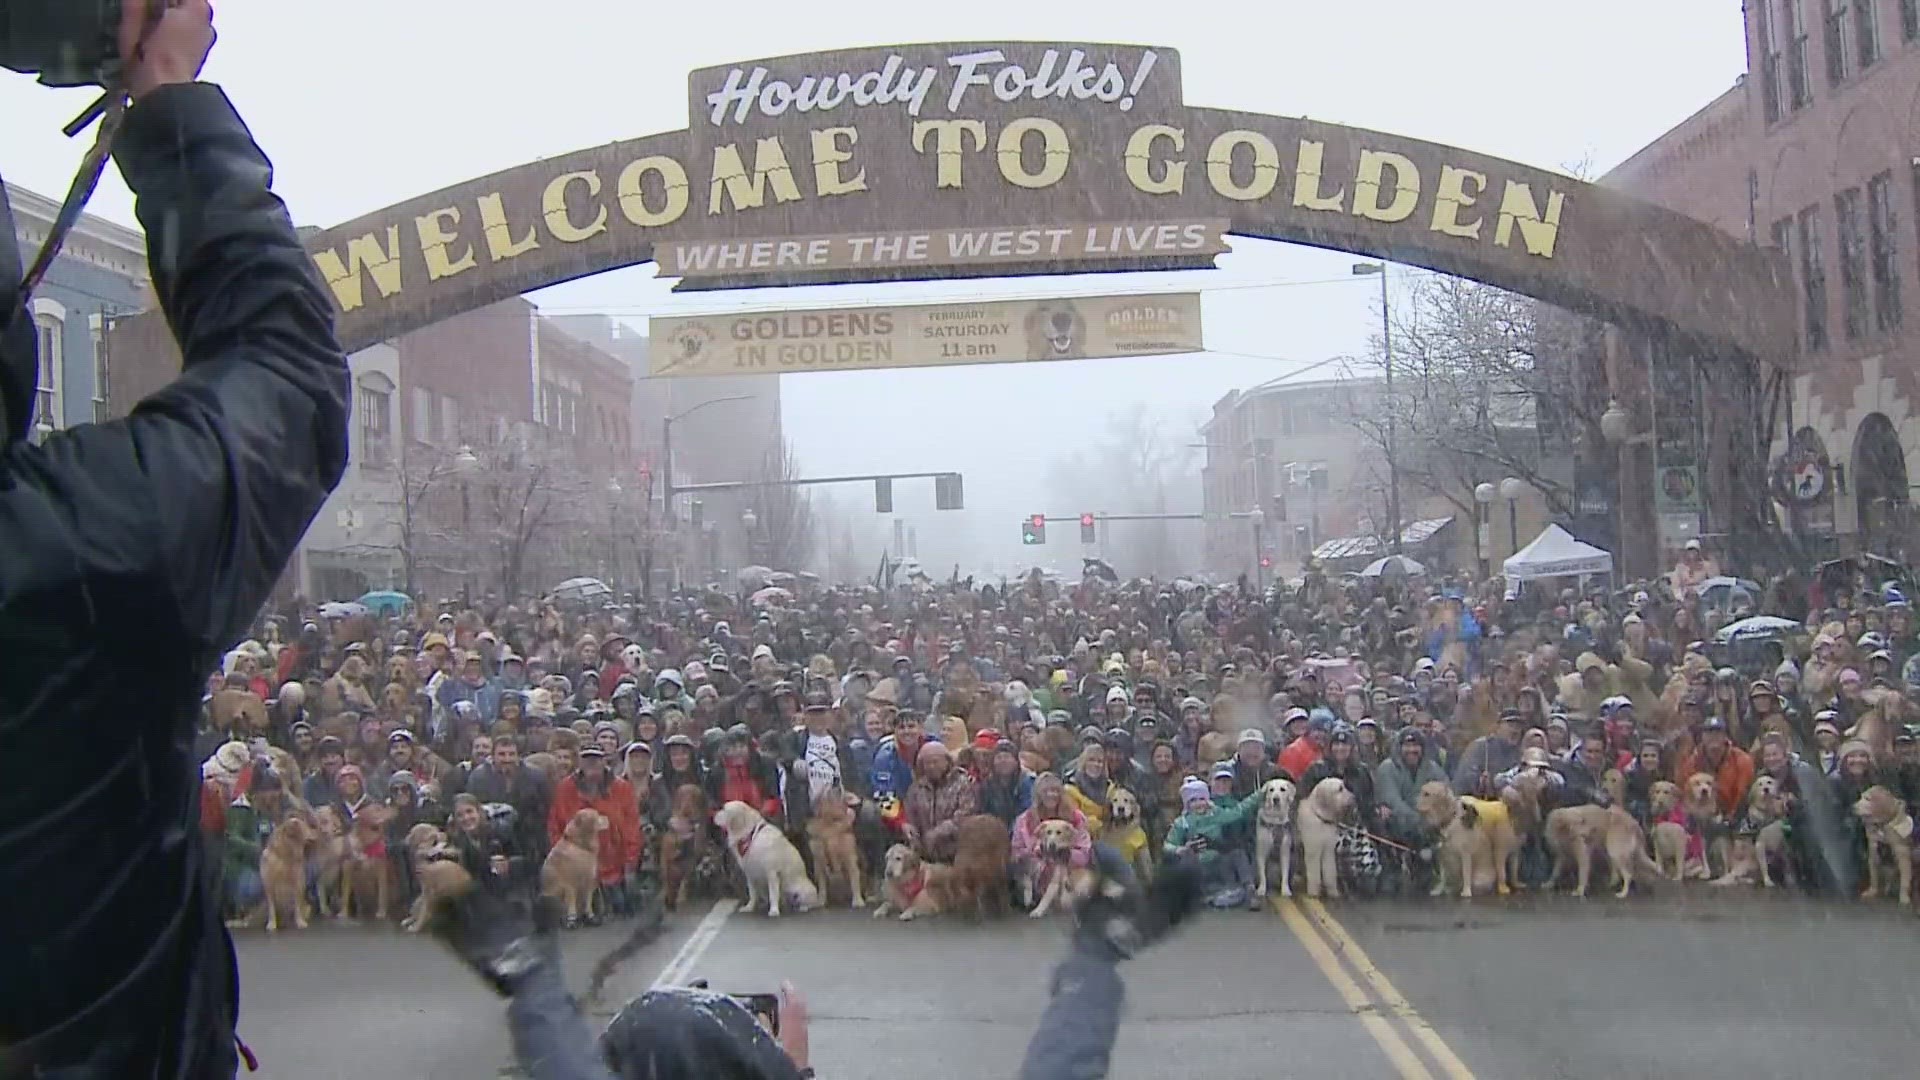 The annual Goldens in Golden celebration draws people and pups from all over the country to Colorado, but this is the first time they’ve dealt with heavy snow.